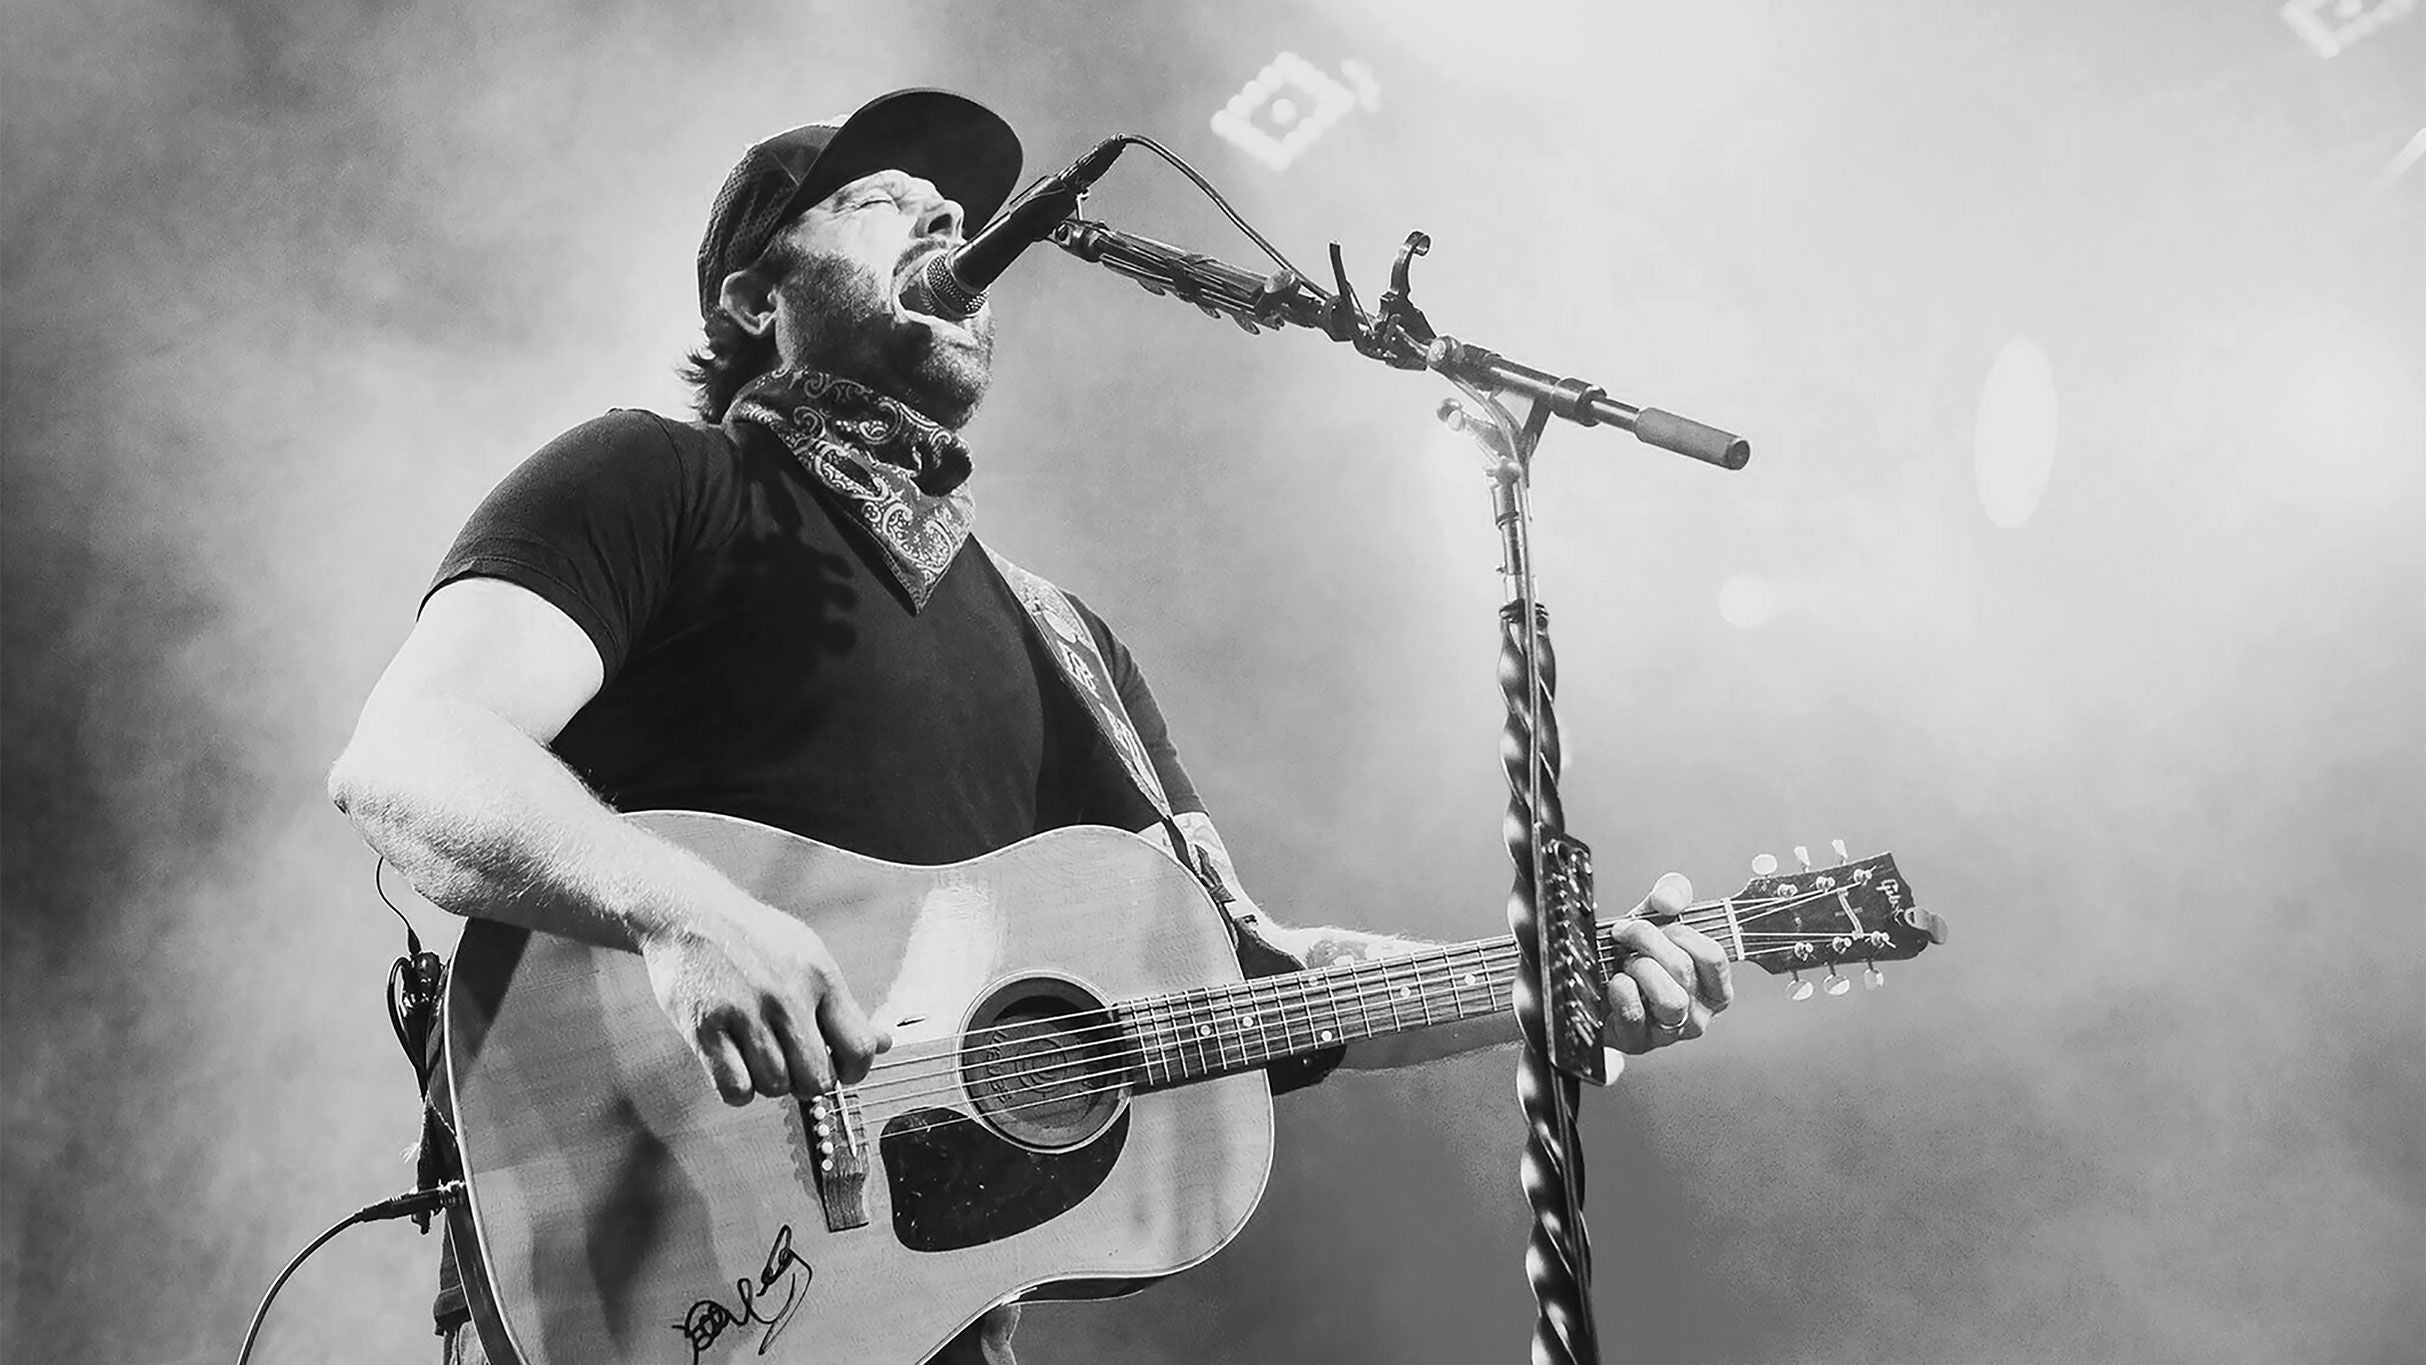 Randy Houser free pre-sale code for early tickets in Charles Town